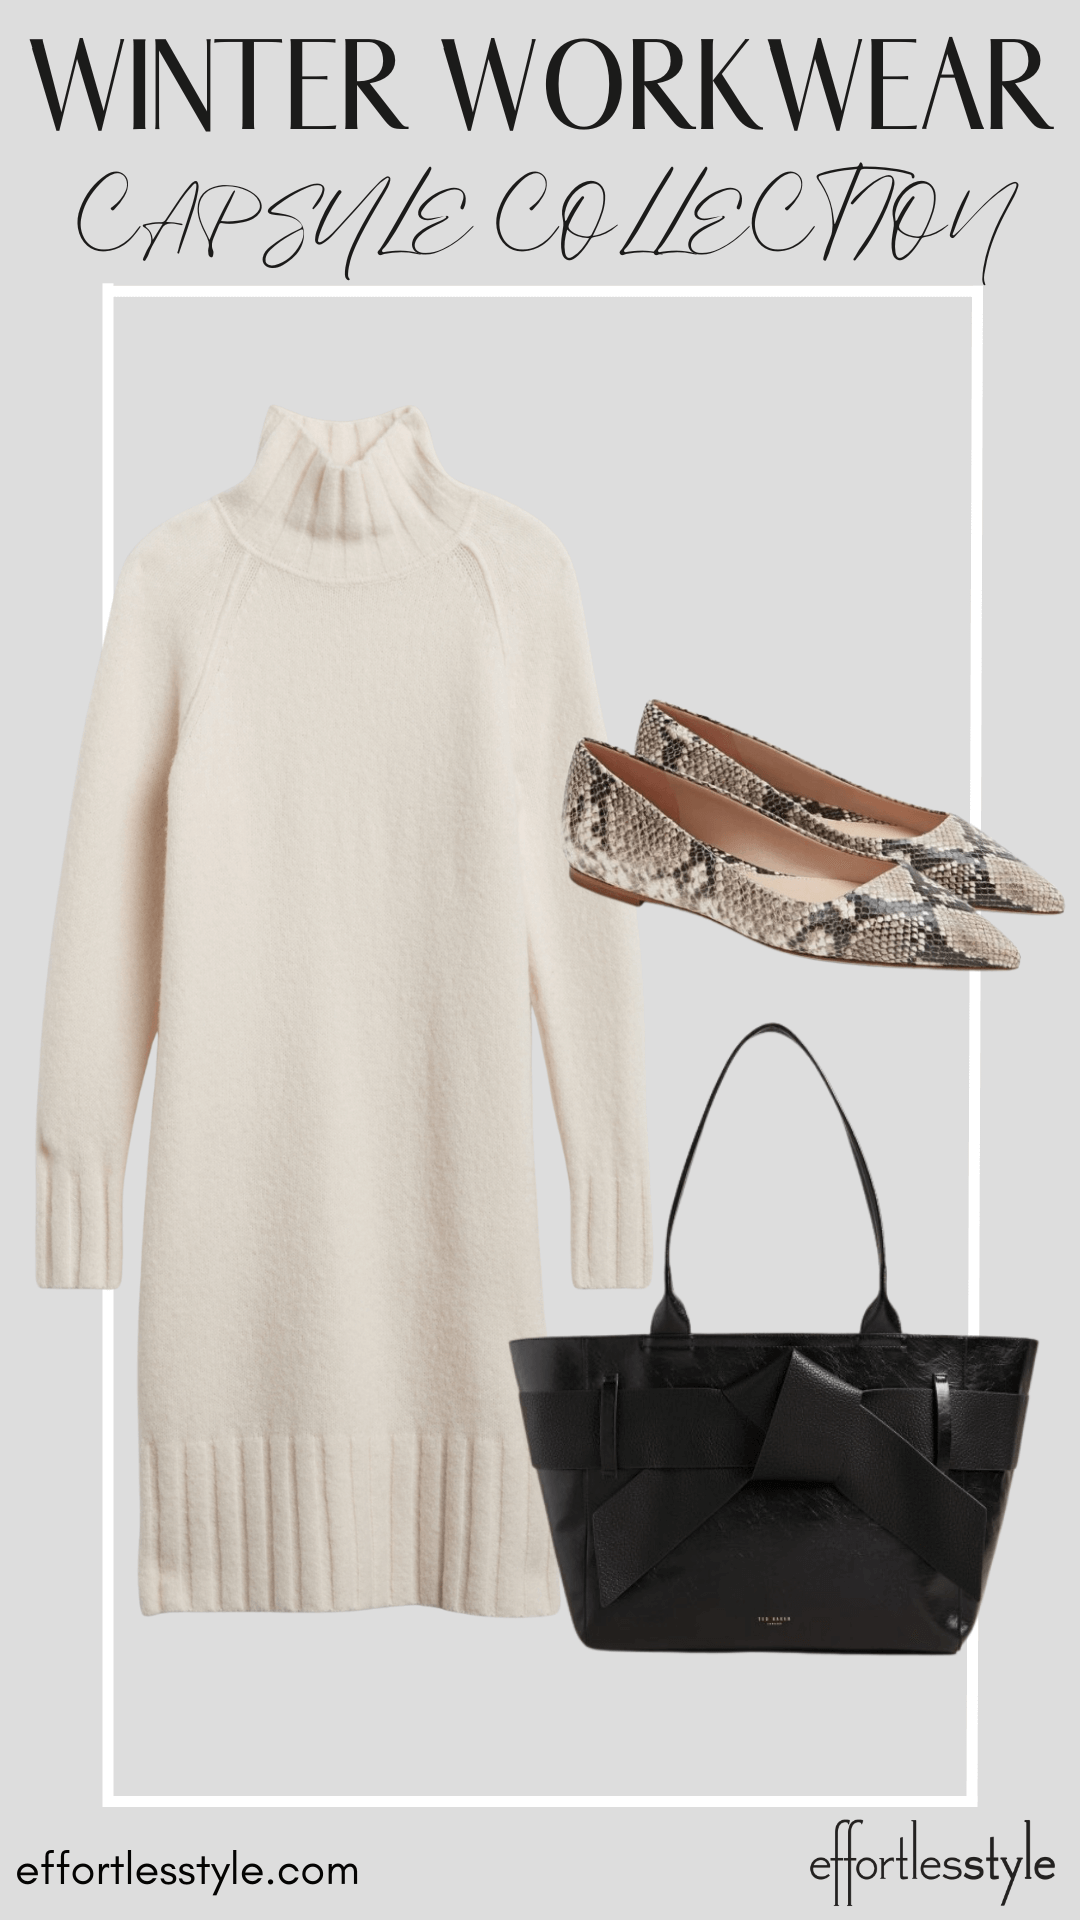 Sweater Dress how to wear a sweater dress with flats how to style snakeskin flats how to wear snake print shoes Nashville personal stylists share favorite pieces for the office